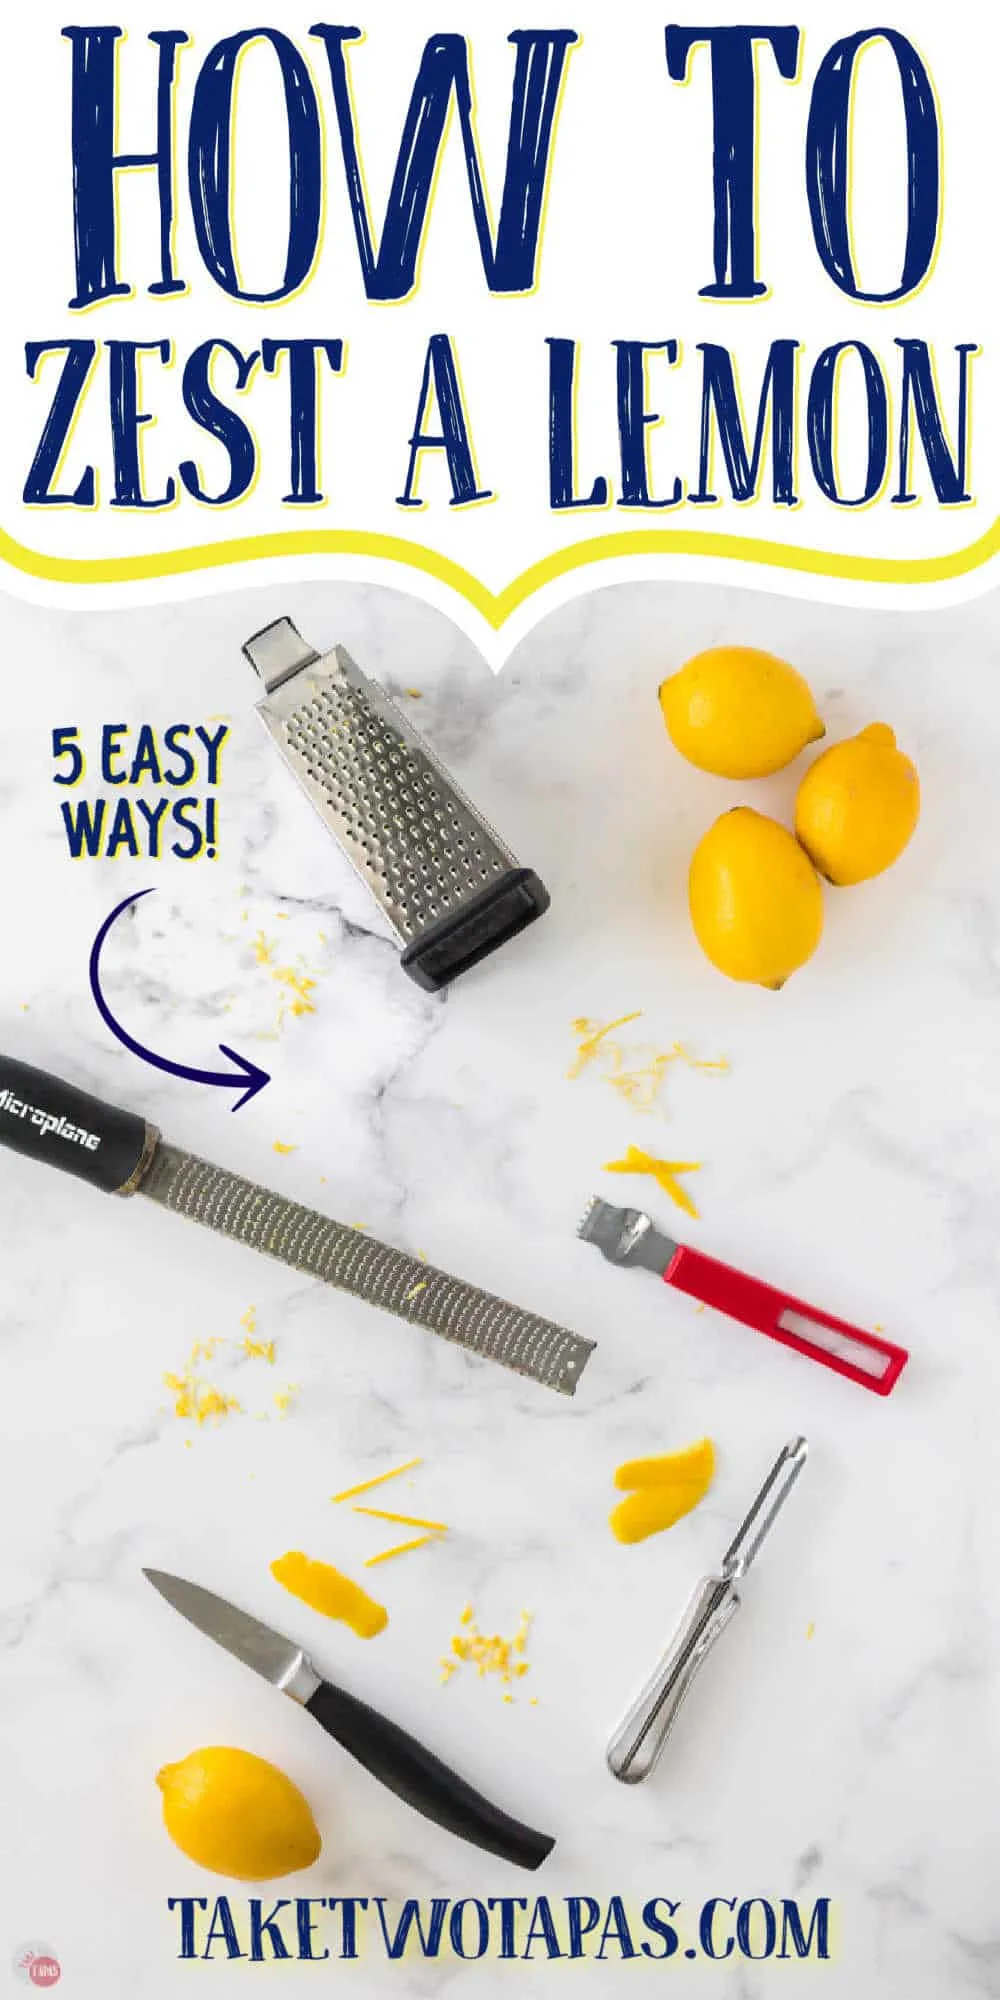 lemons and tools with text "how to zest a lemon"